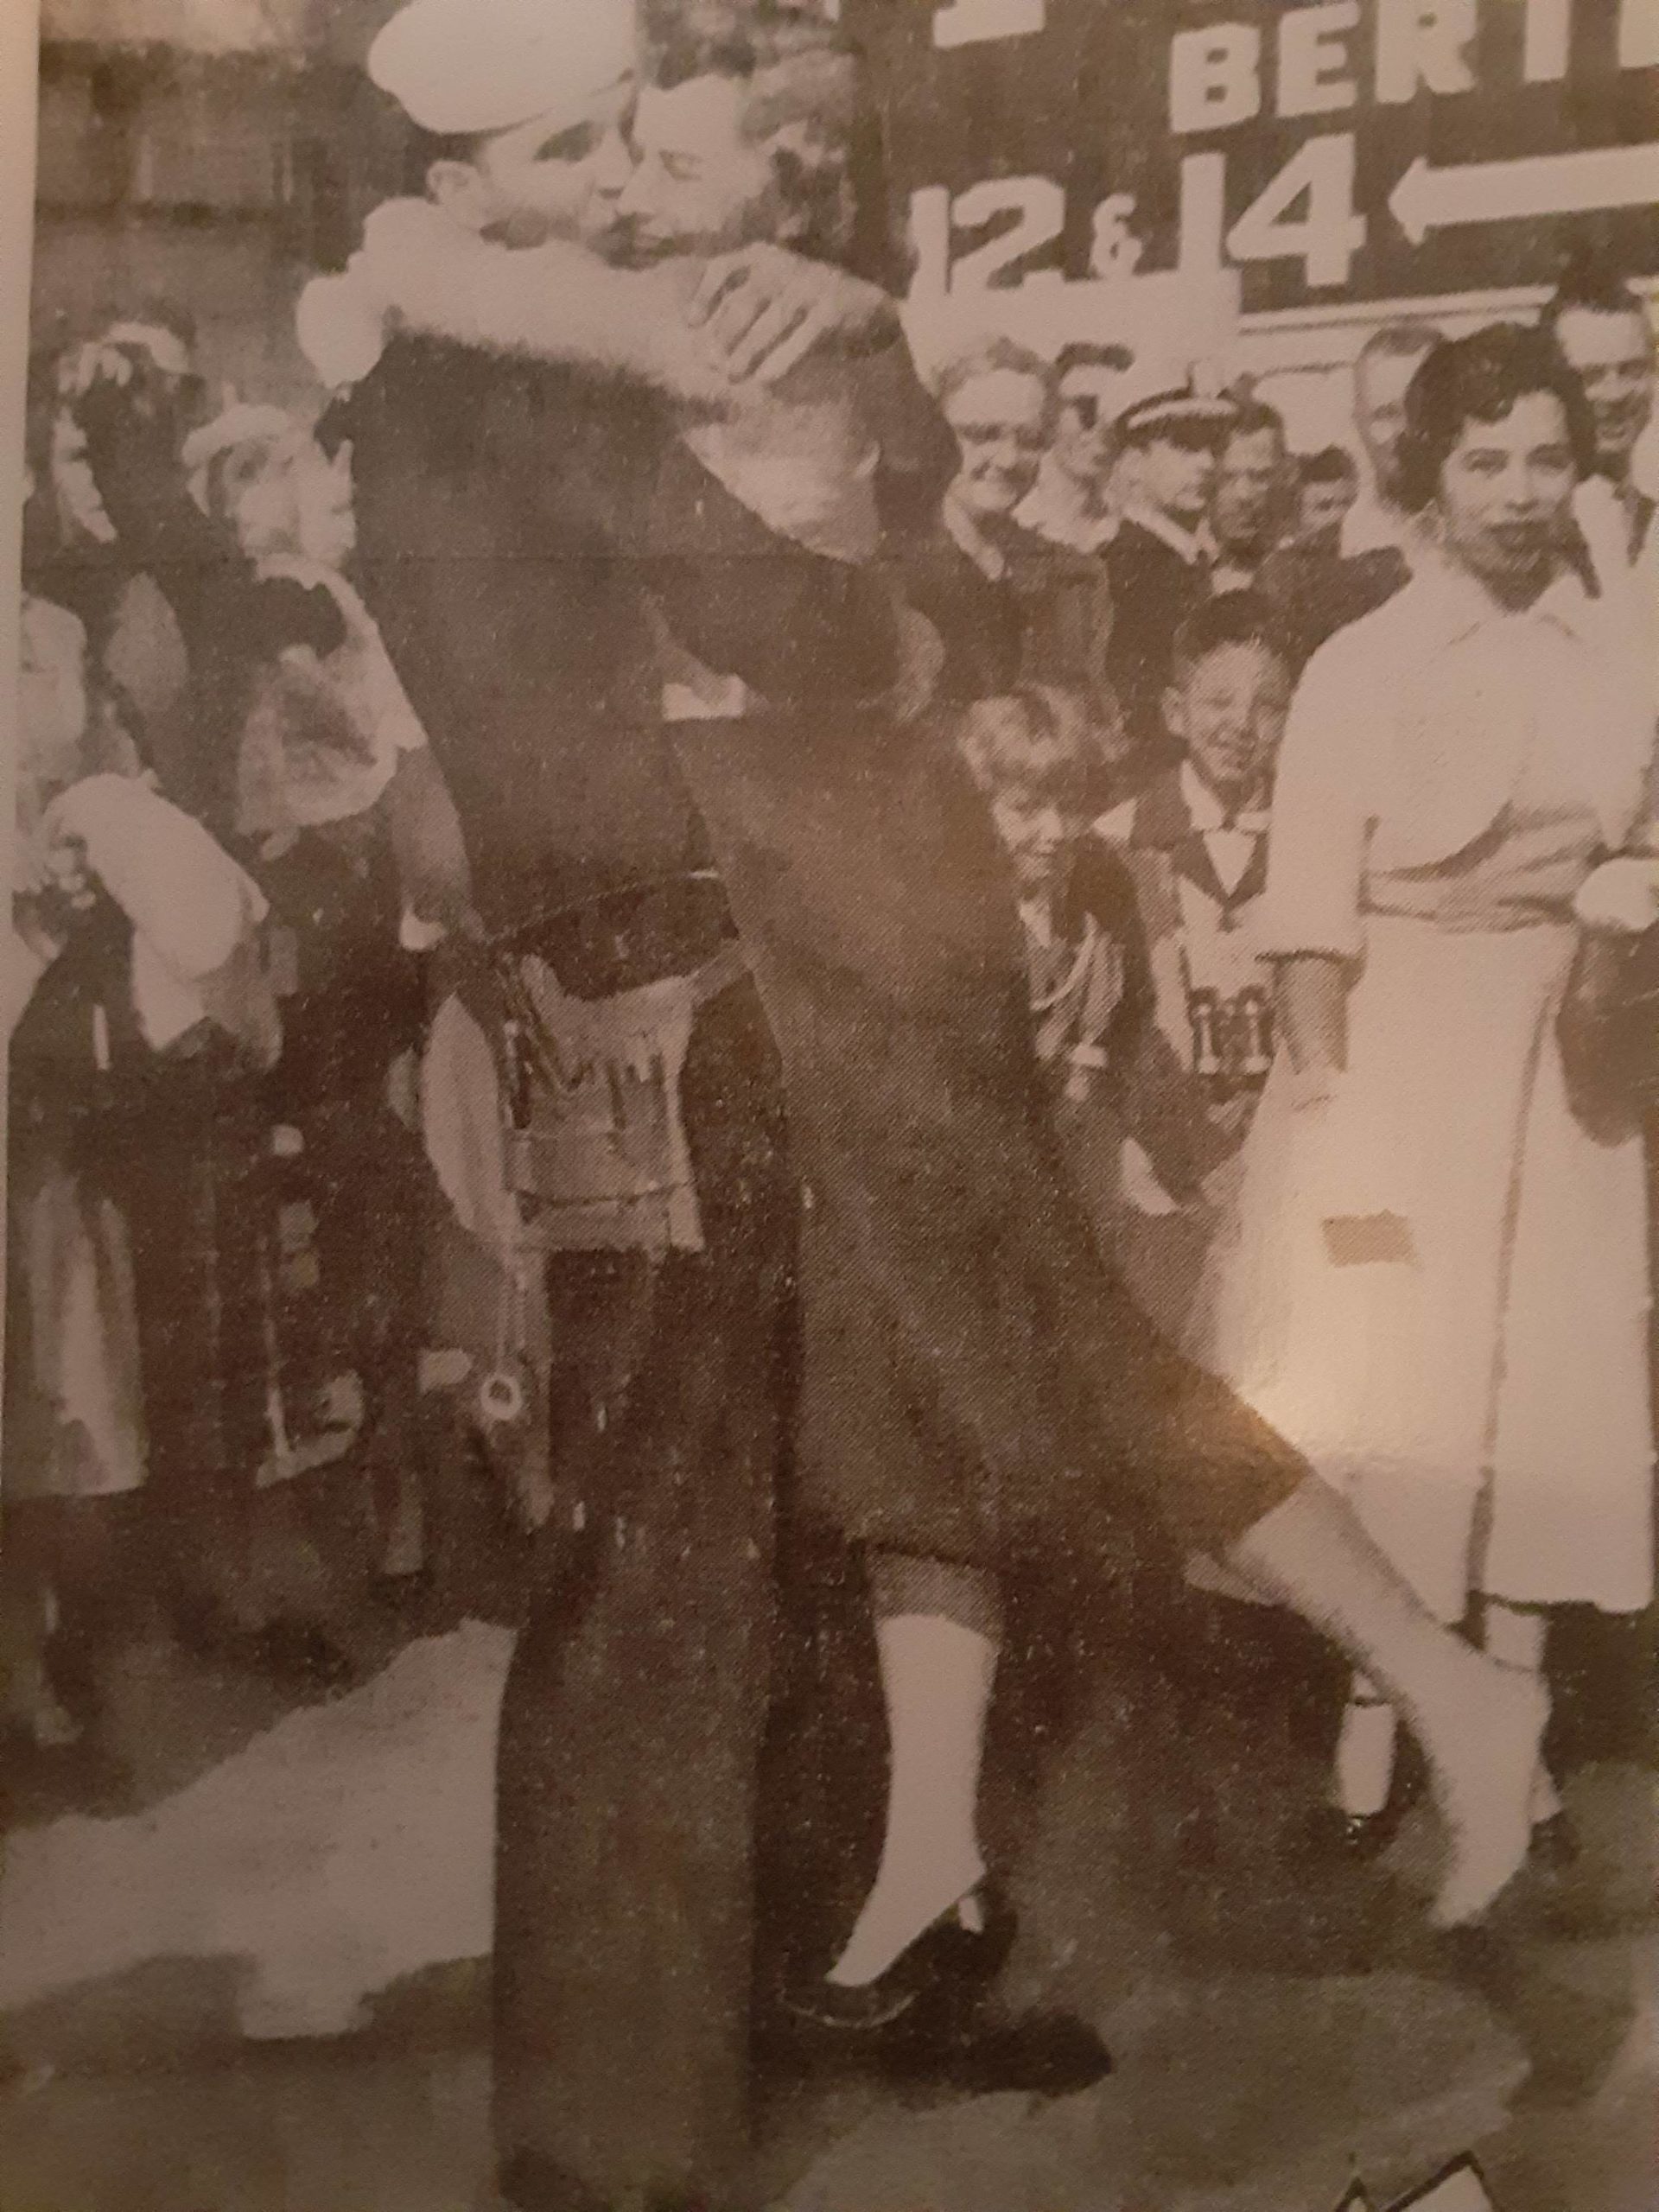 Willa Burley flies into the arms of her sailor husband, Robert Burley, just back from service aboard the USS Manchester during the Korean War, with such fervor her shoe flies off, in this clipping from the Los Angeles Times in 1953.